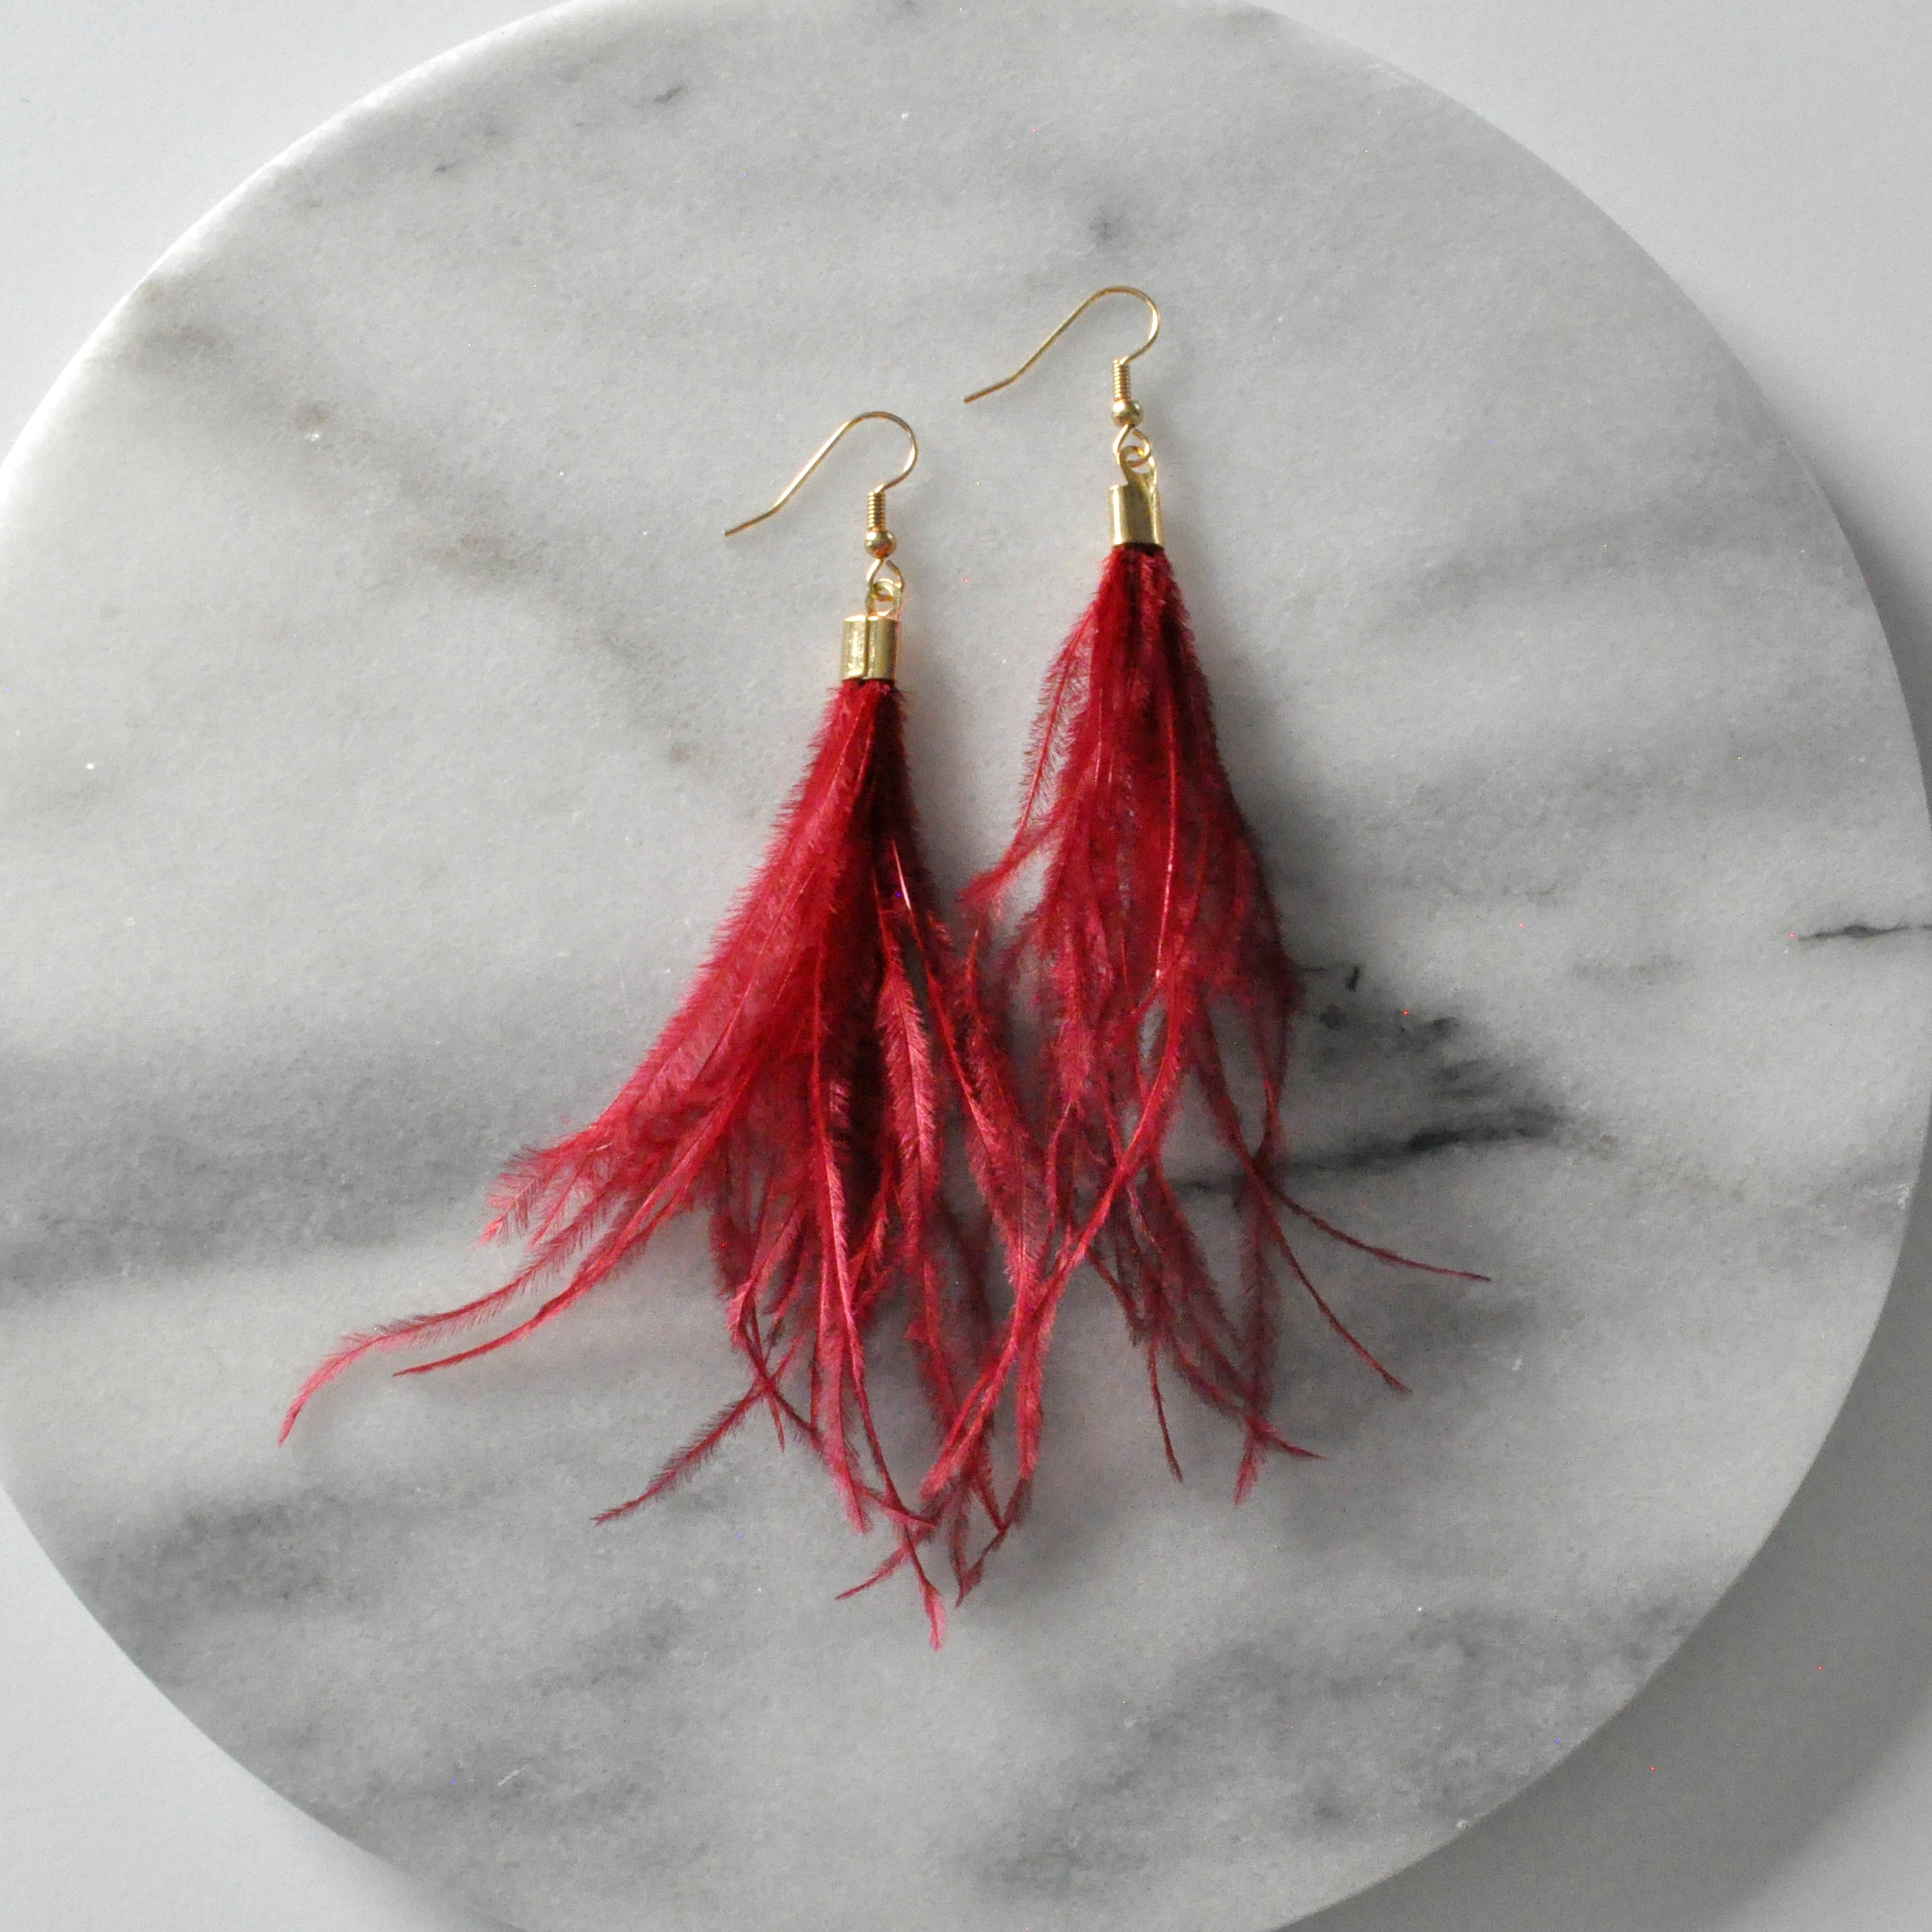 Ostrich Feather Earrings Discontinued Version - CLEARANCE